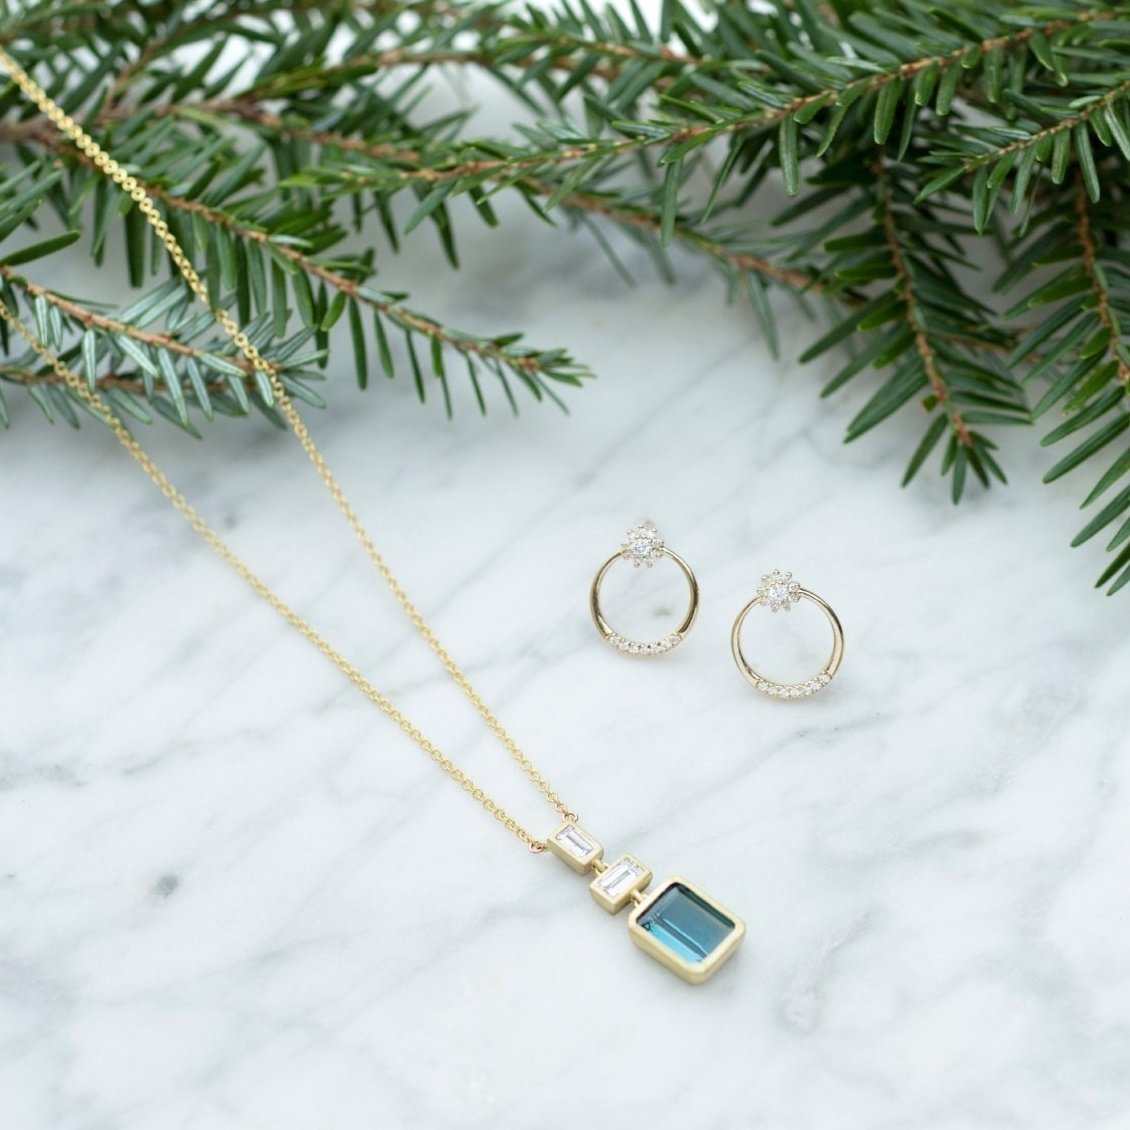 How to Style Your Fashion Jewelry During the Winter Months